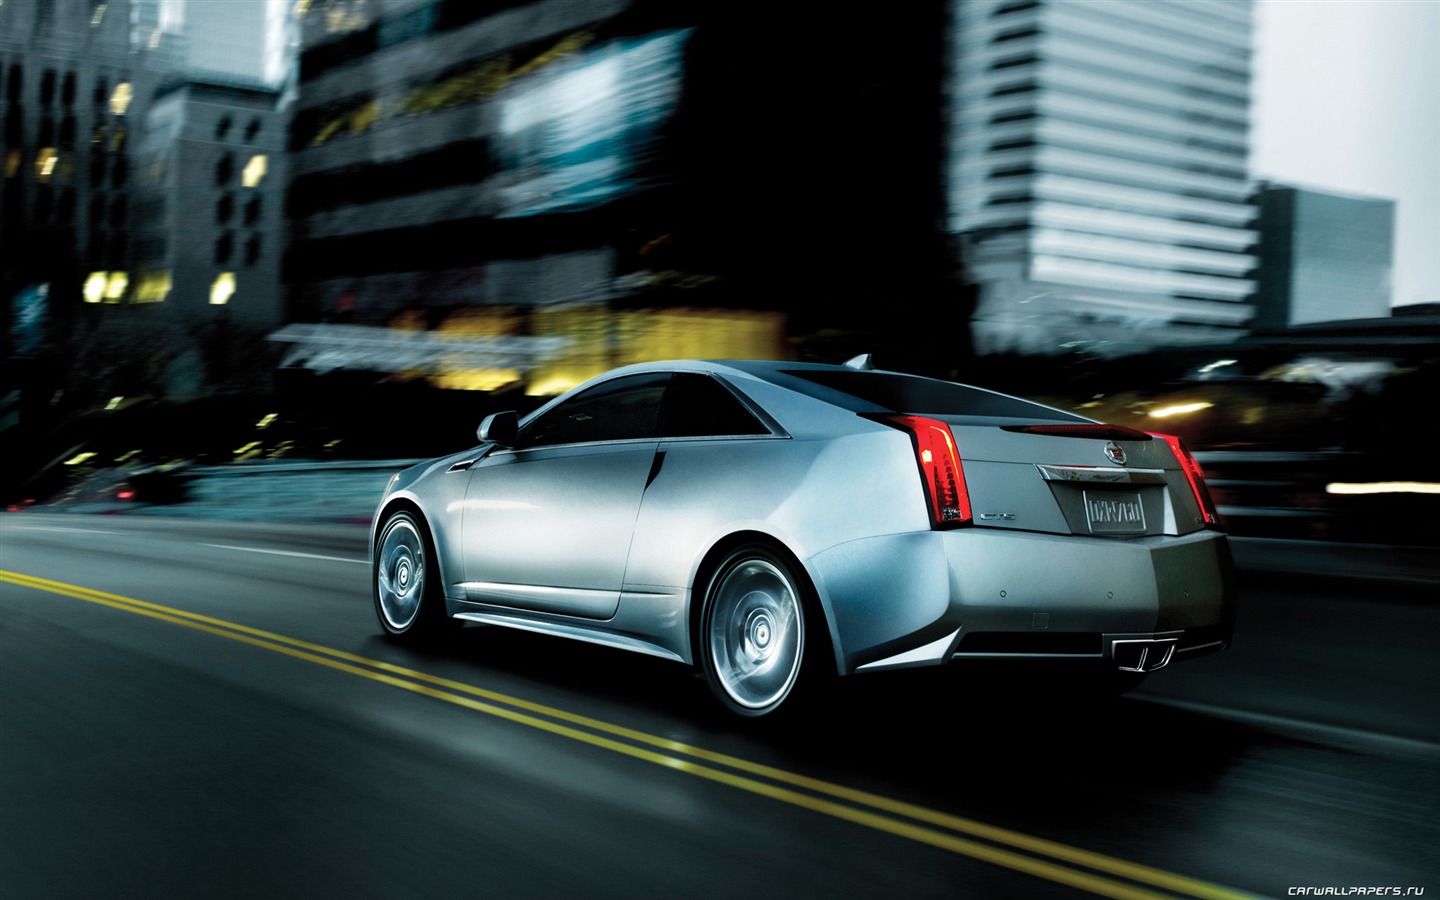 Cadillac CTS Coupe - 2011 凱迪拉克 #1 - 1440x900